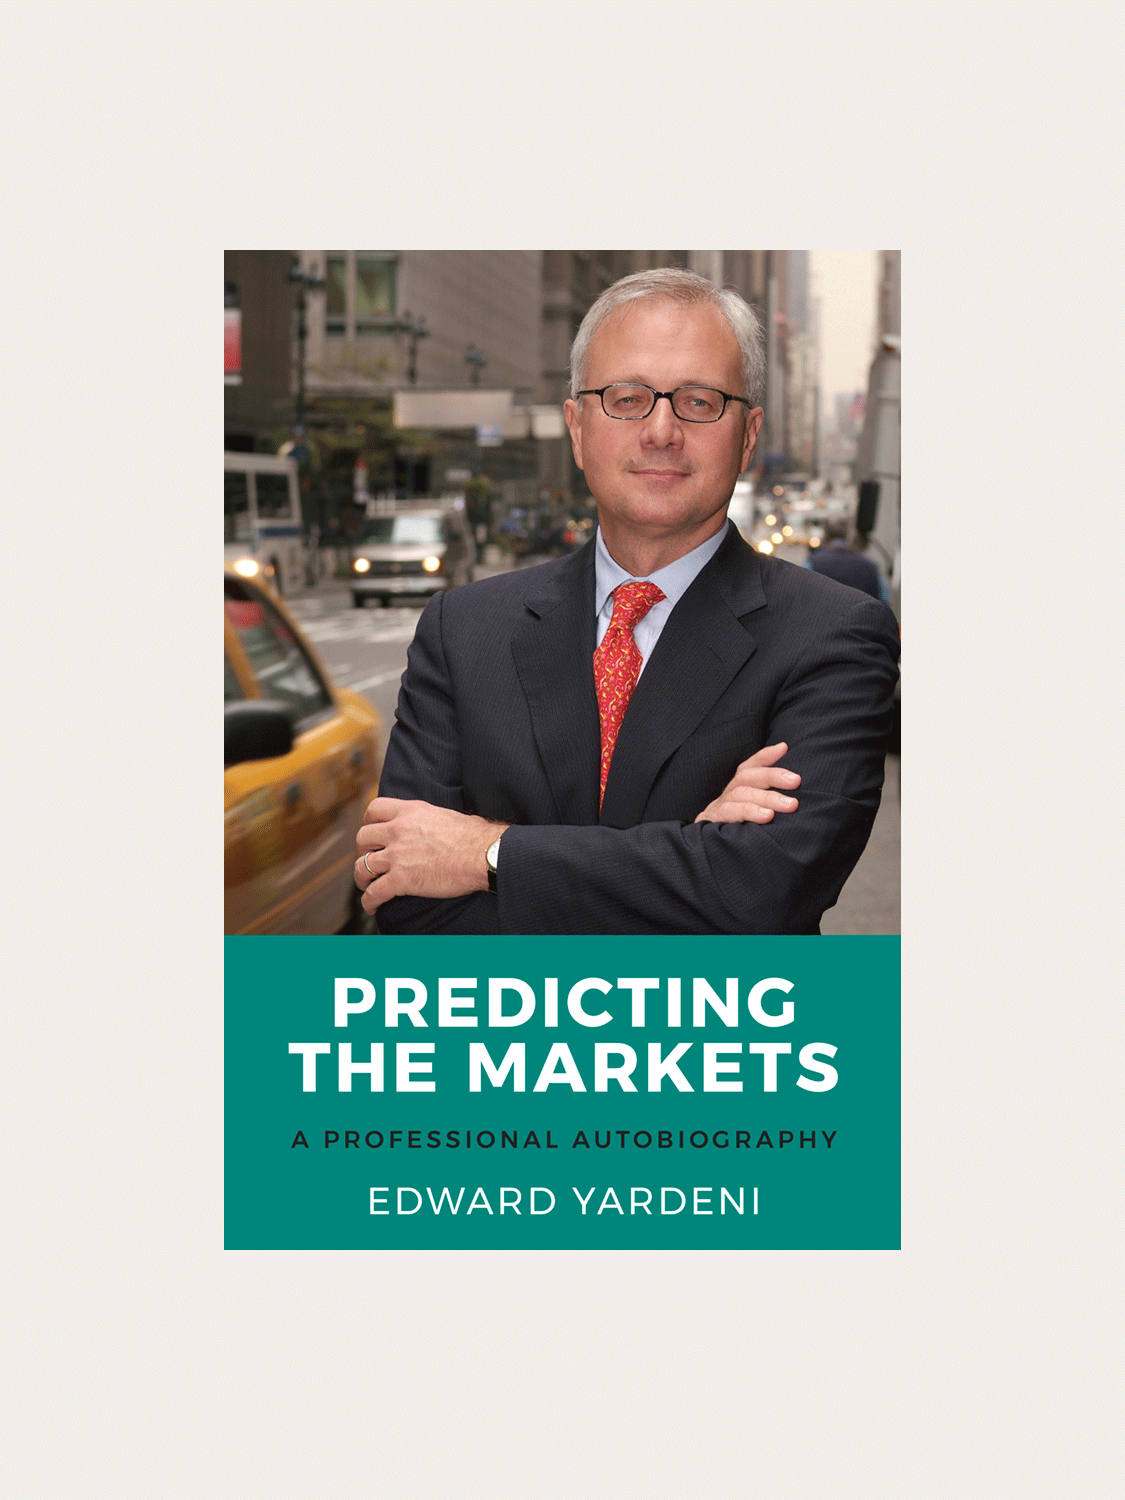 Book cover for Predicting the Markets by Edward Yardeni